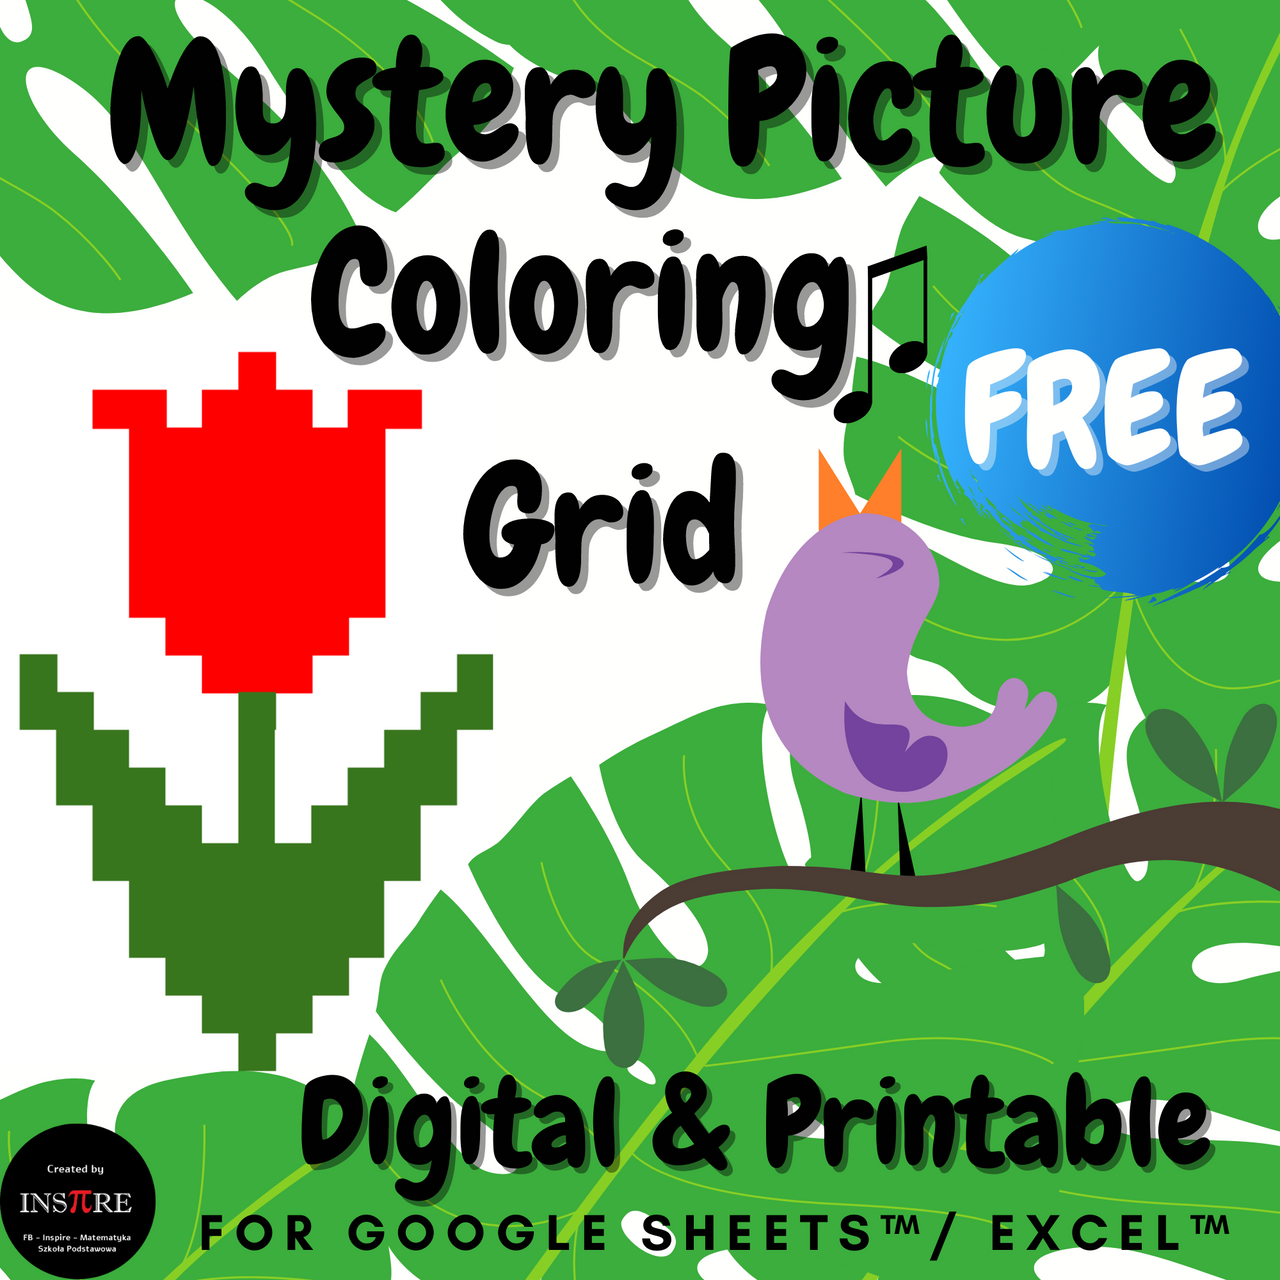 Free coding mothers day mystery picture coloring grid page printable digital